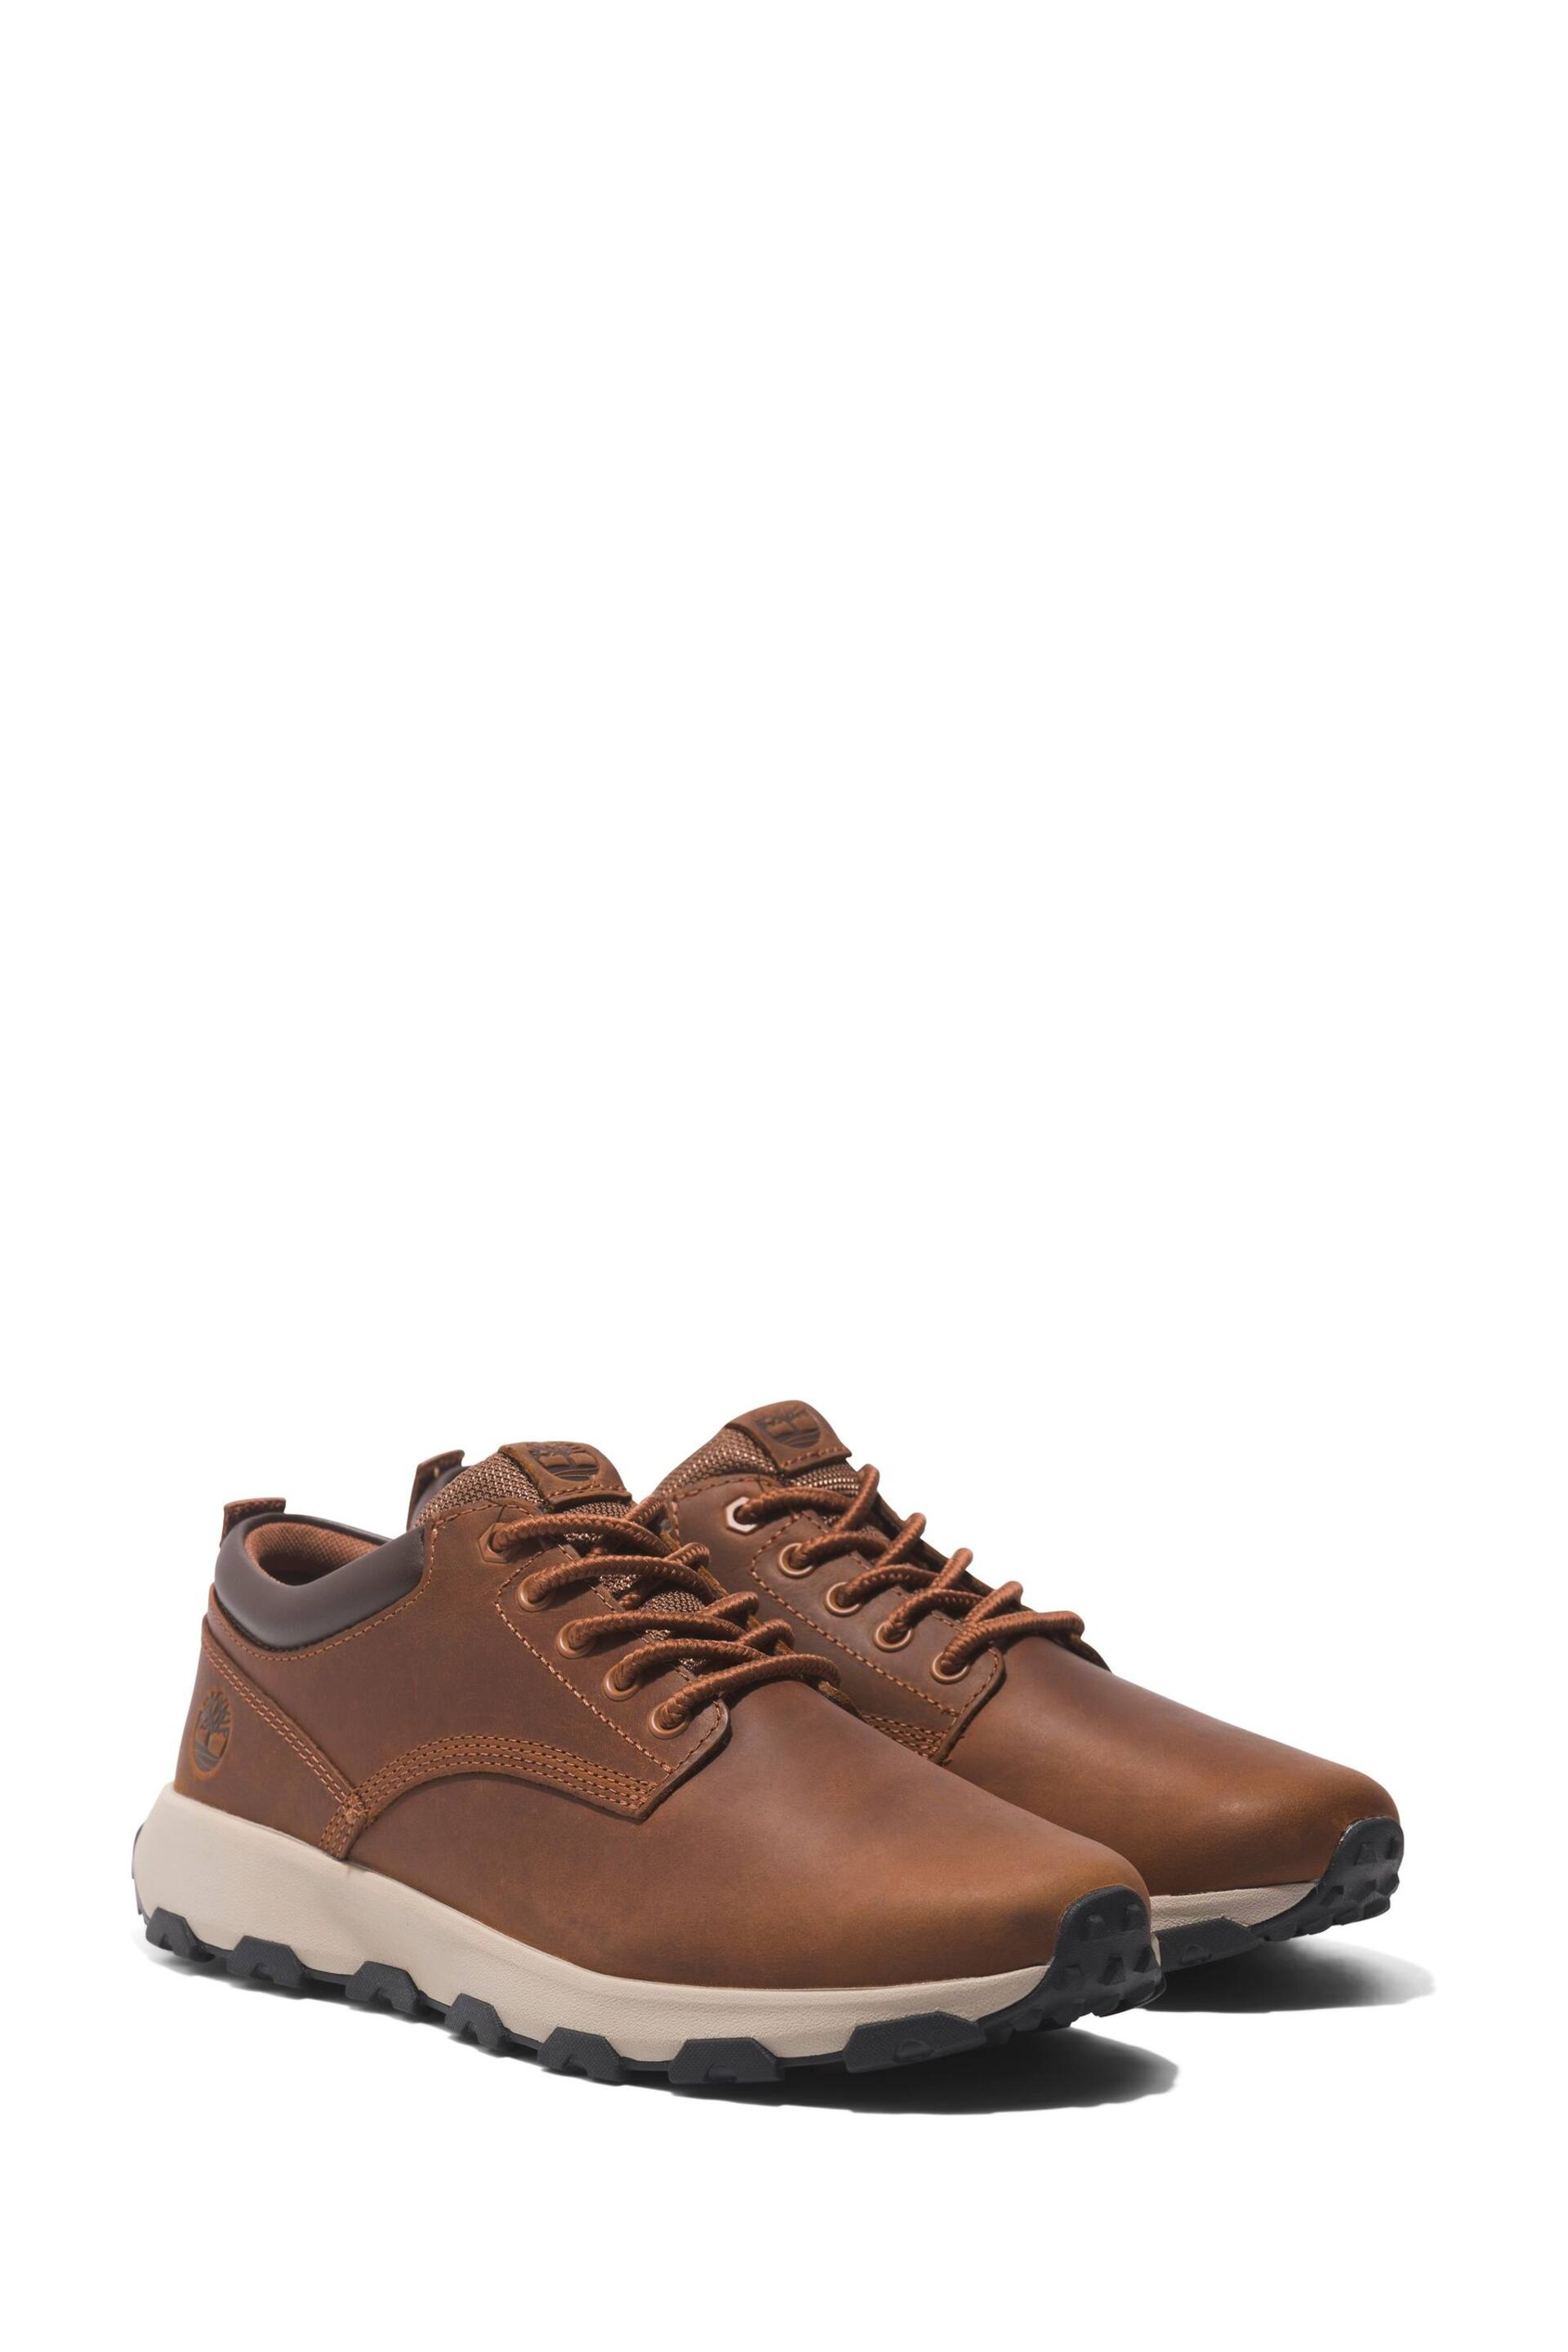 Timberland Winsor Park Ox Brown Trainers - Image 2 of 5